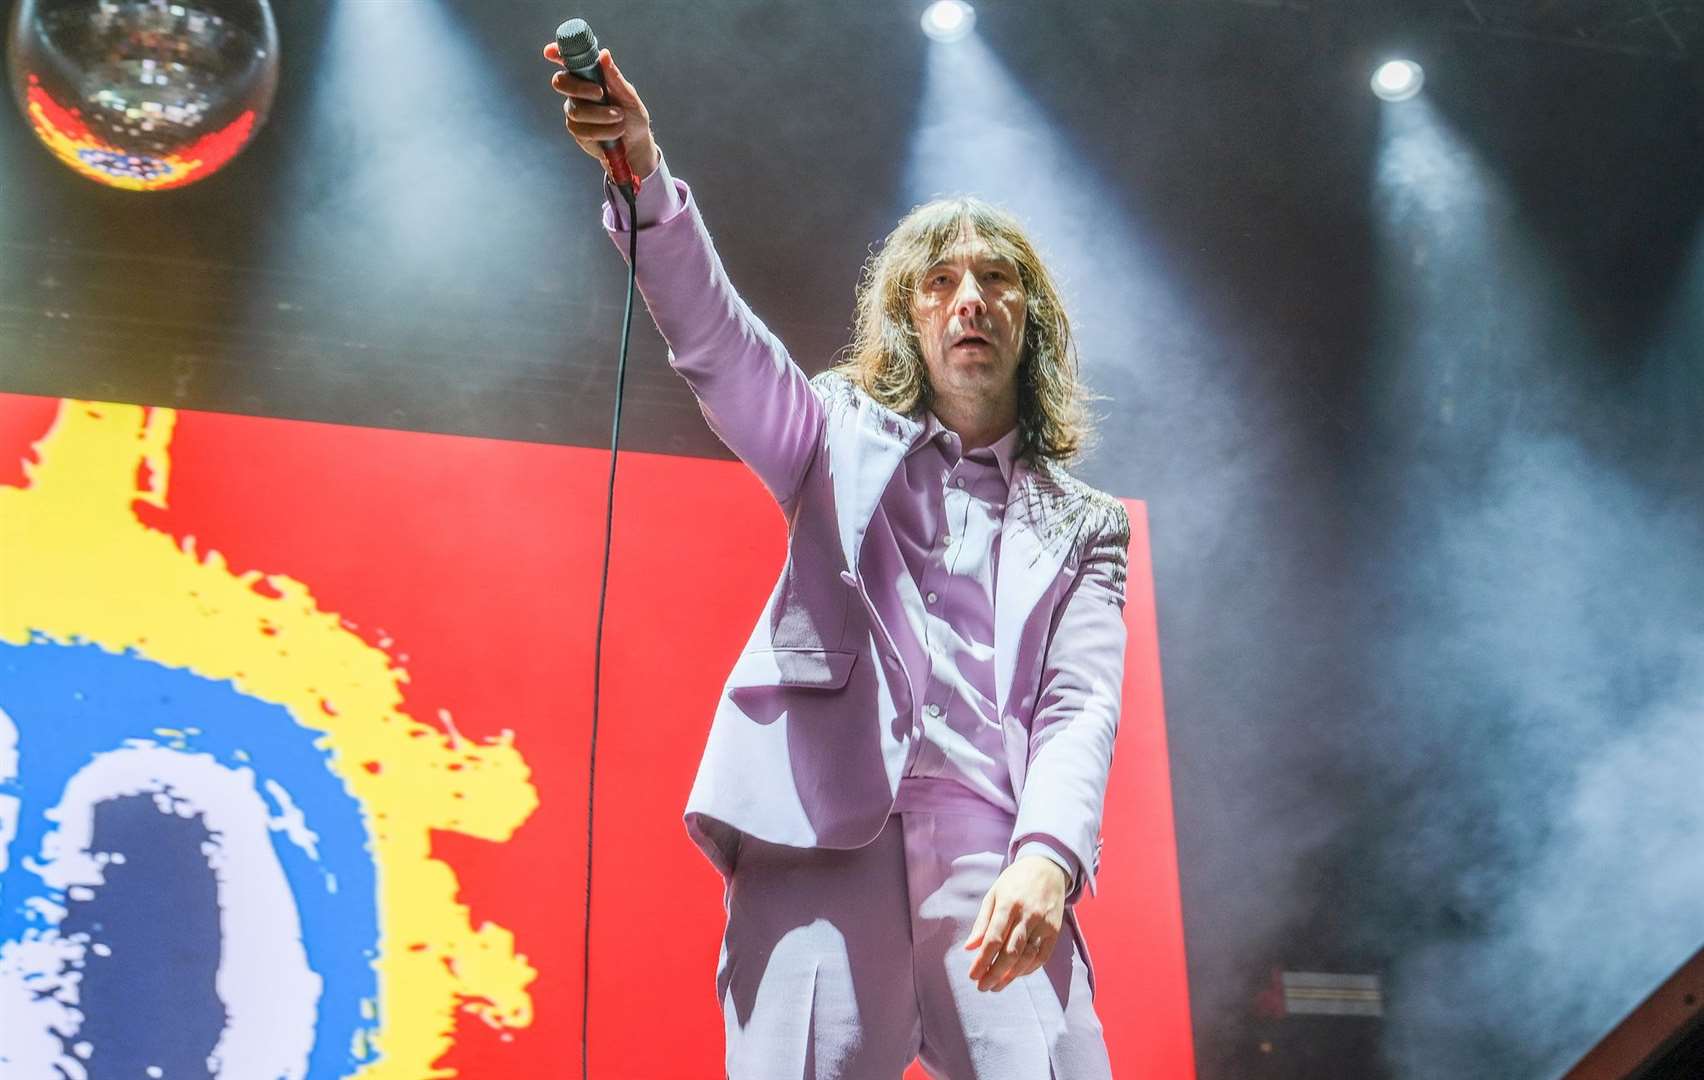 Rock band Primal Scream will perform with Happy Mondays at Dreamland